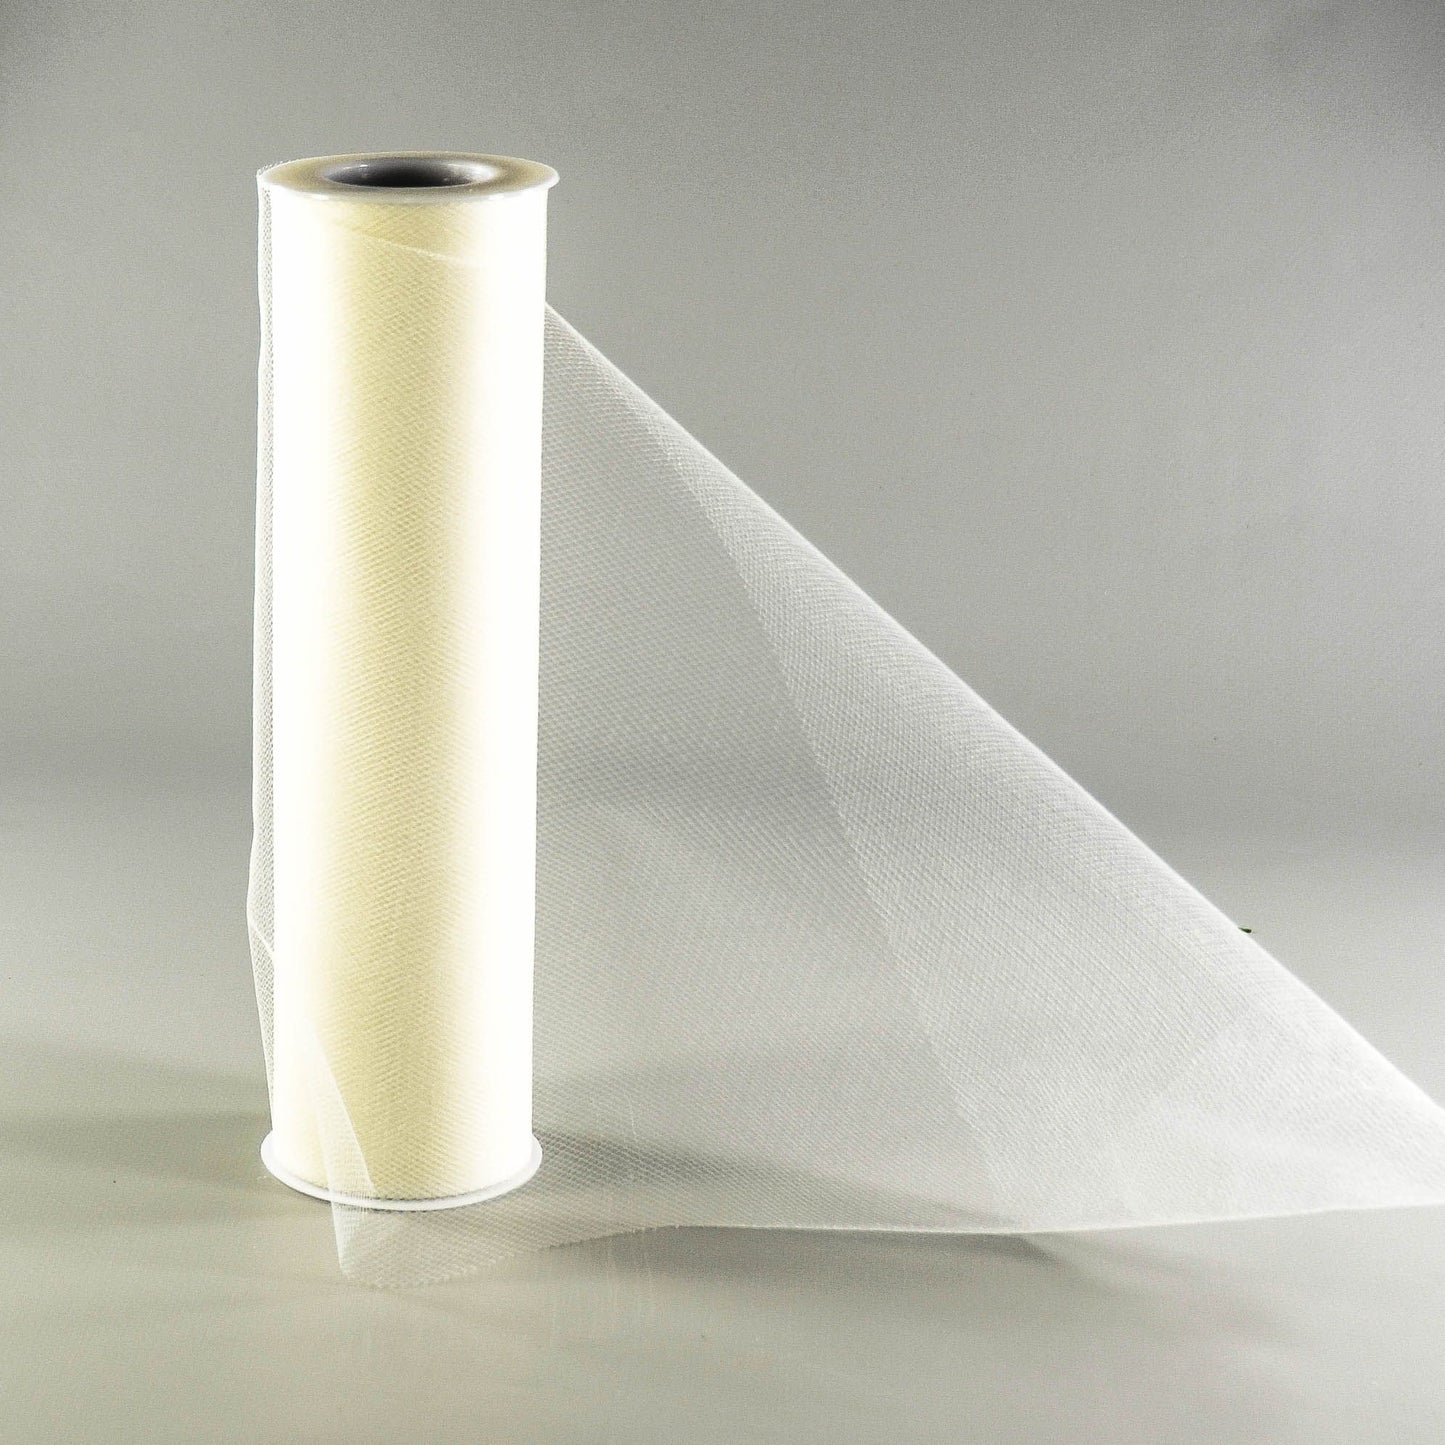 9" Wide Tulle in White/Ivory 25 yards